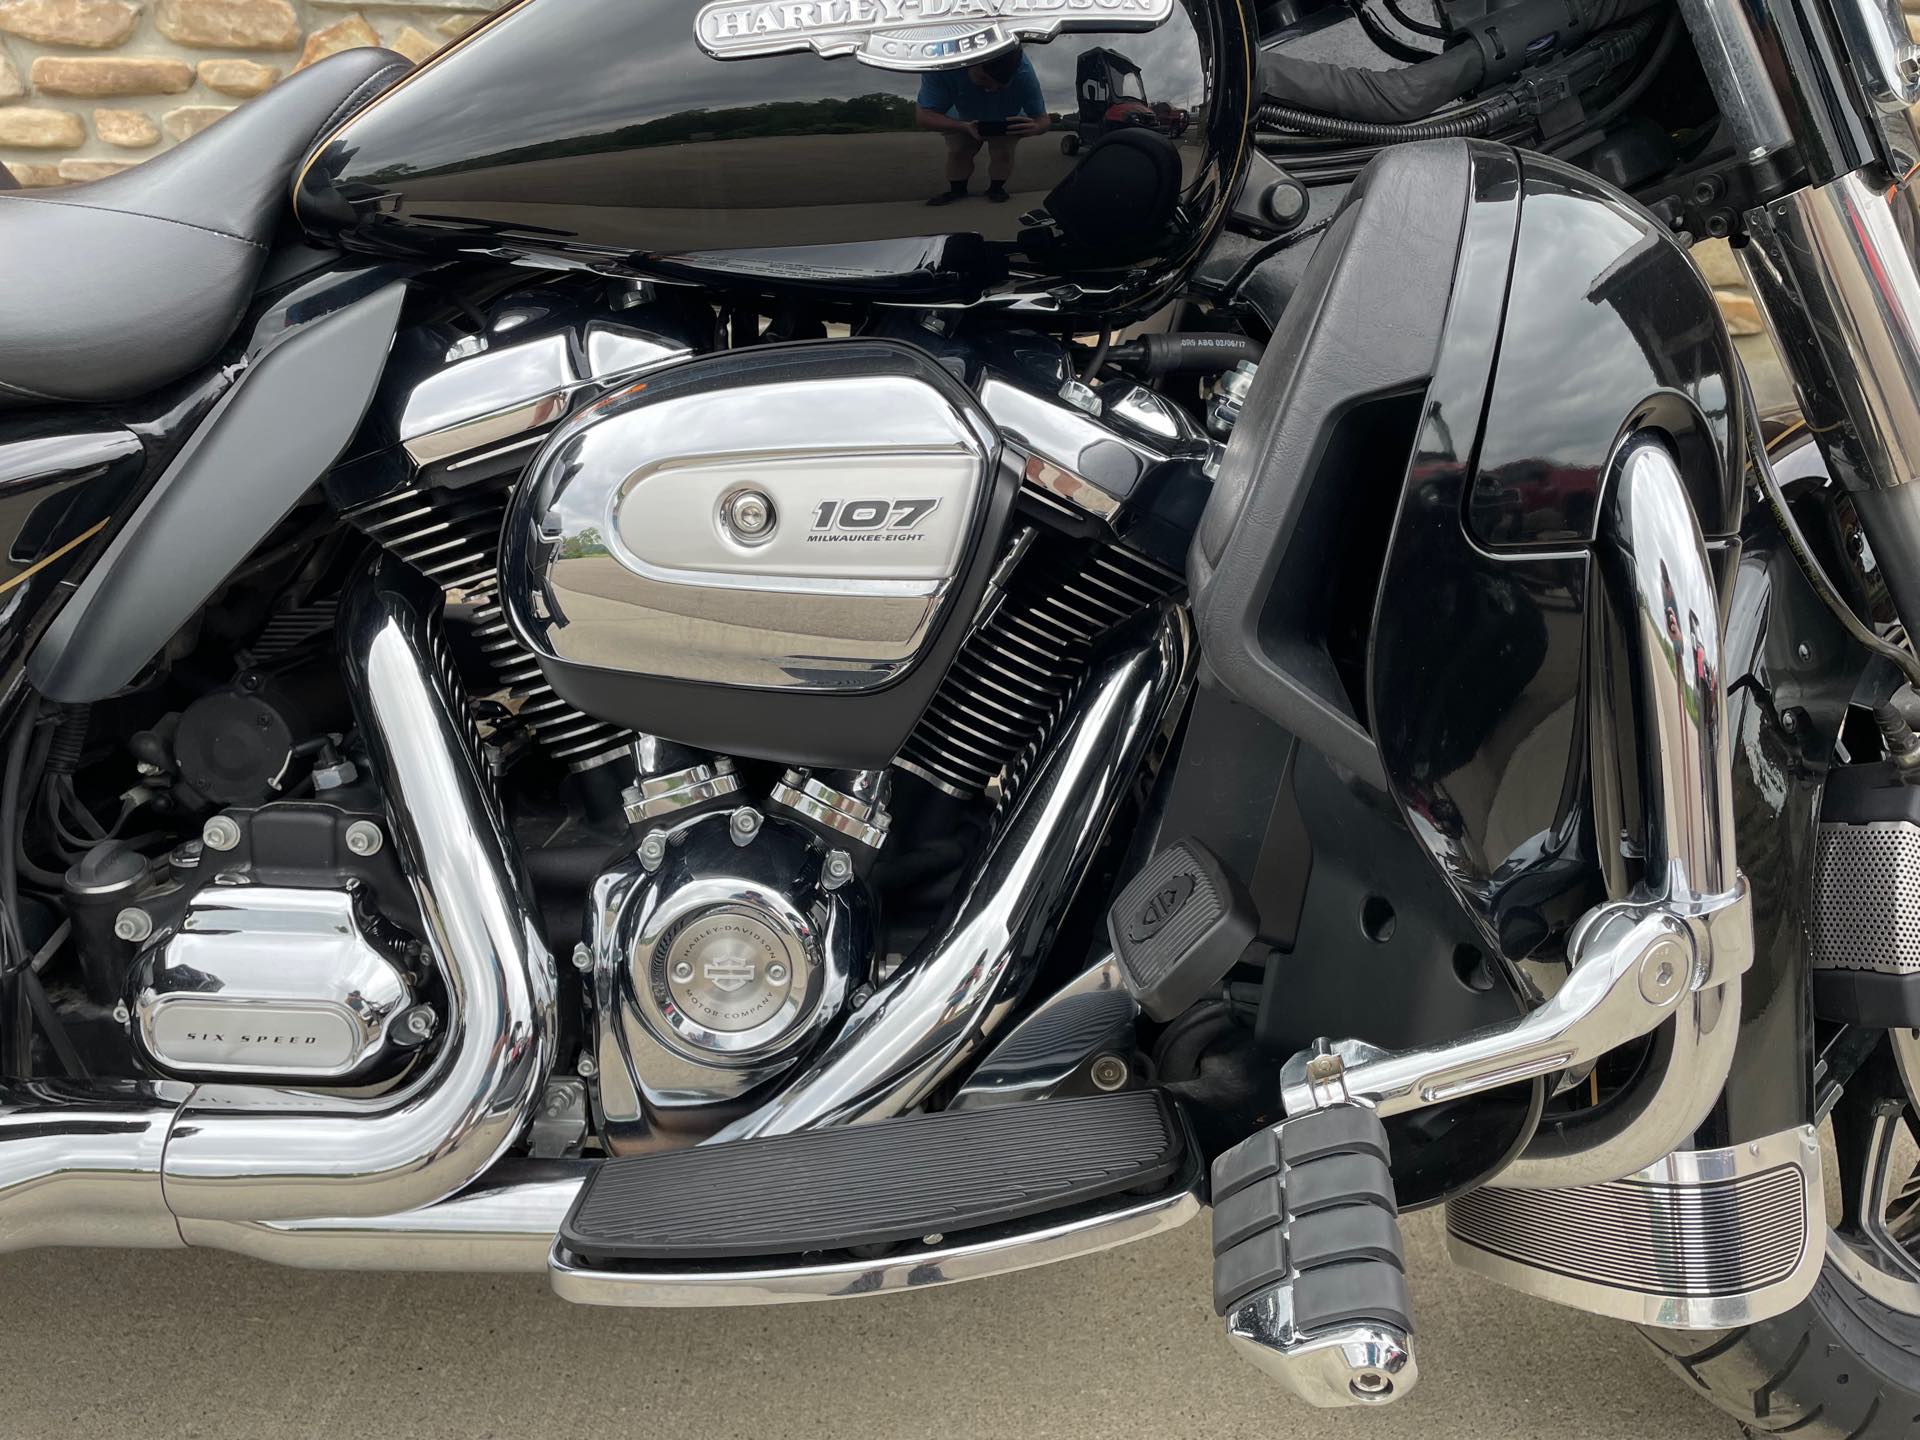 2018 Harley-Davidson Electra Glide Firefighter Edition Ultra Limited at Arkport Cycles